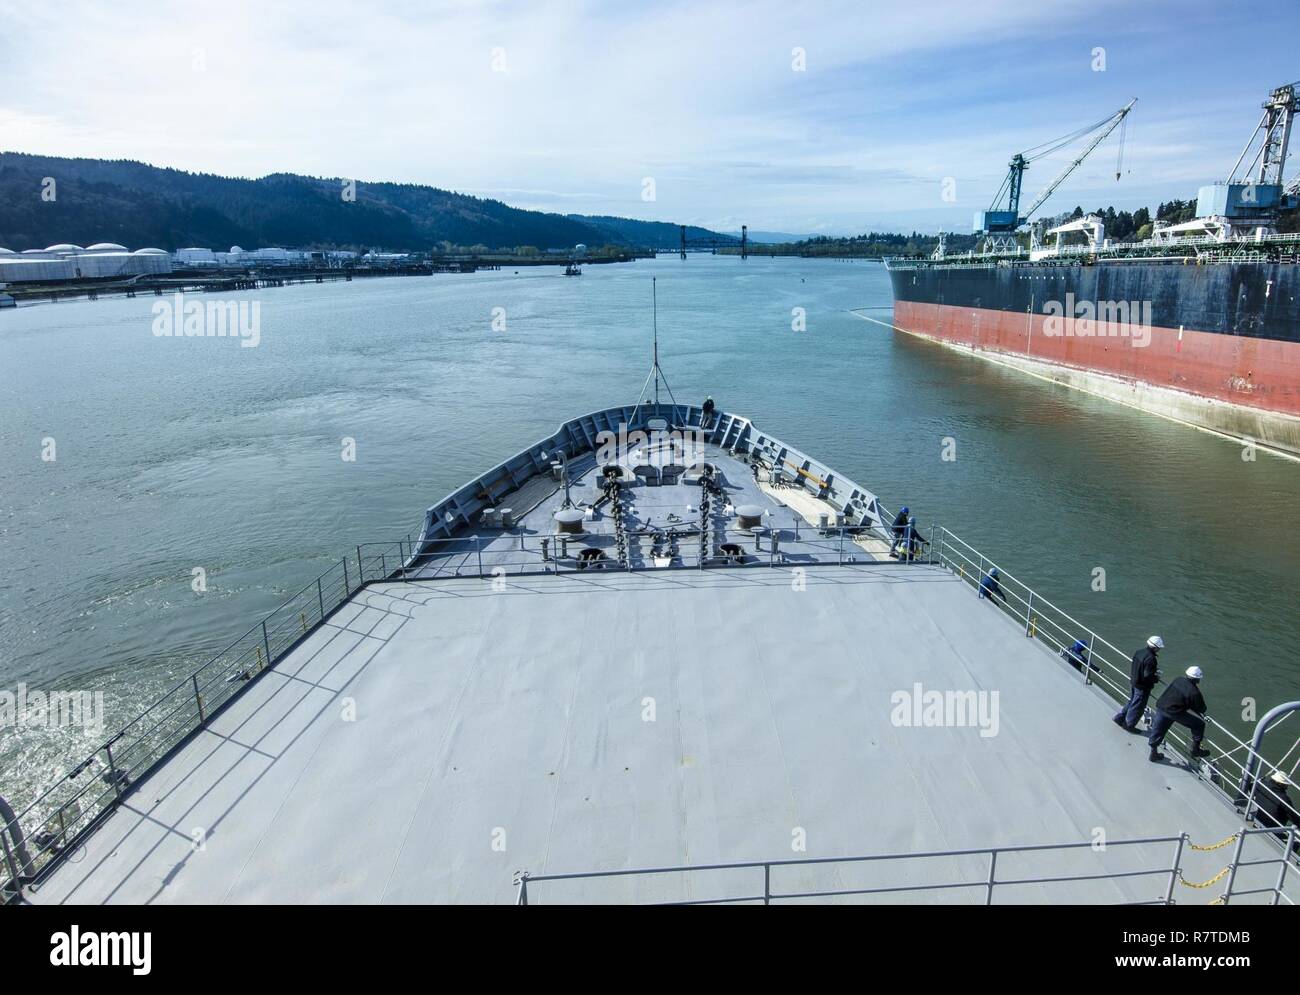 PORTLAND, Ore. (April 6, 2017) - The submarine tender USS Frank Cable (AS 40) transits the Columbia River toward her final destination of Portland, Ore., April 6. Frank Cable is in Portland, Ore. for a scheduled dry-dock phase maintenance availability. Stock Photo